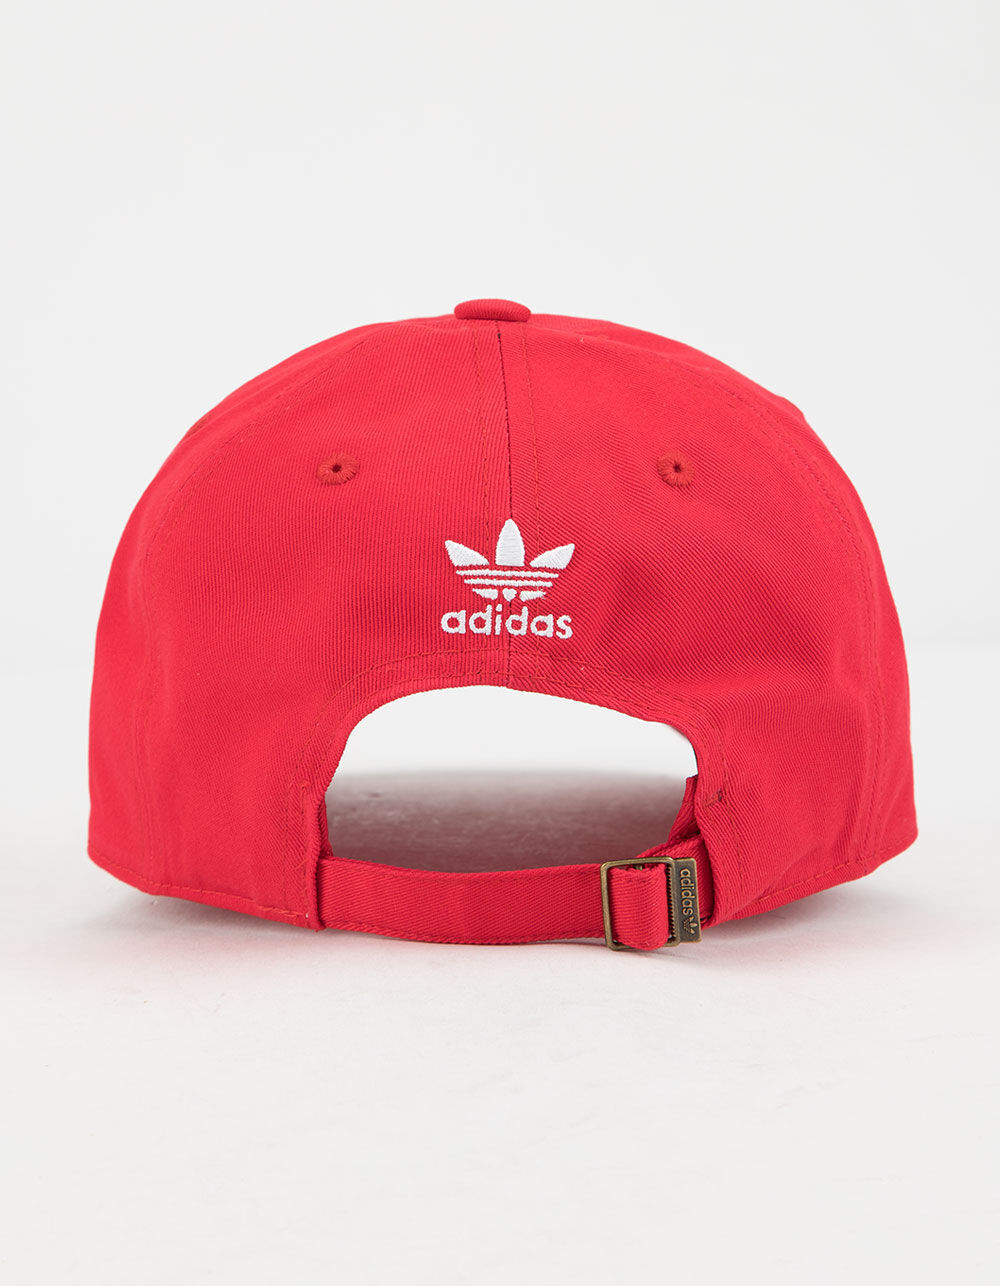 ADIDAS Originals Relaxed Red & White Womens Strapback Hat image number 1